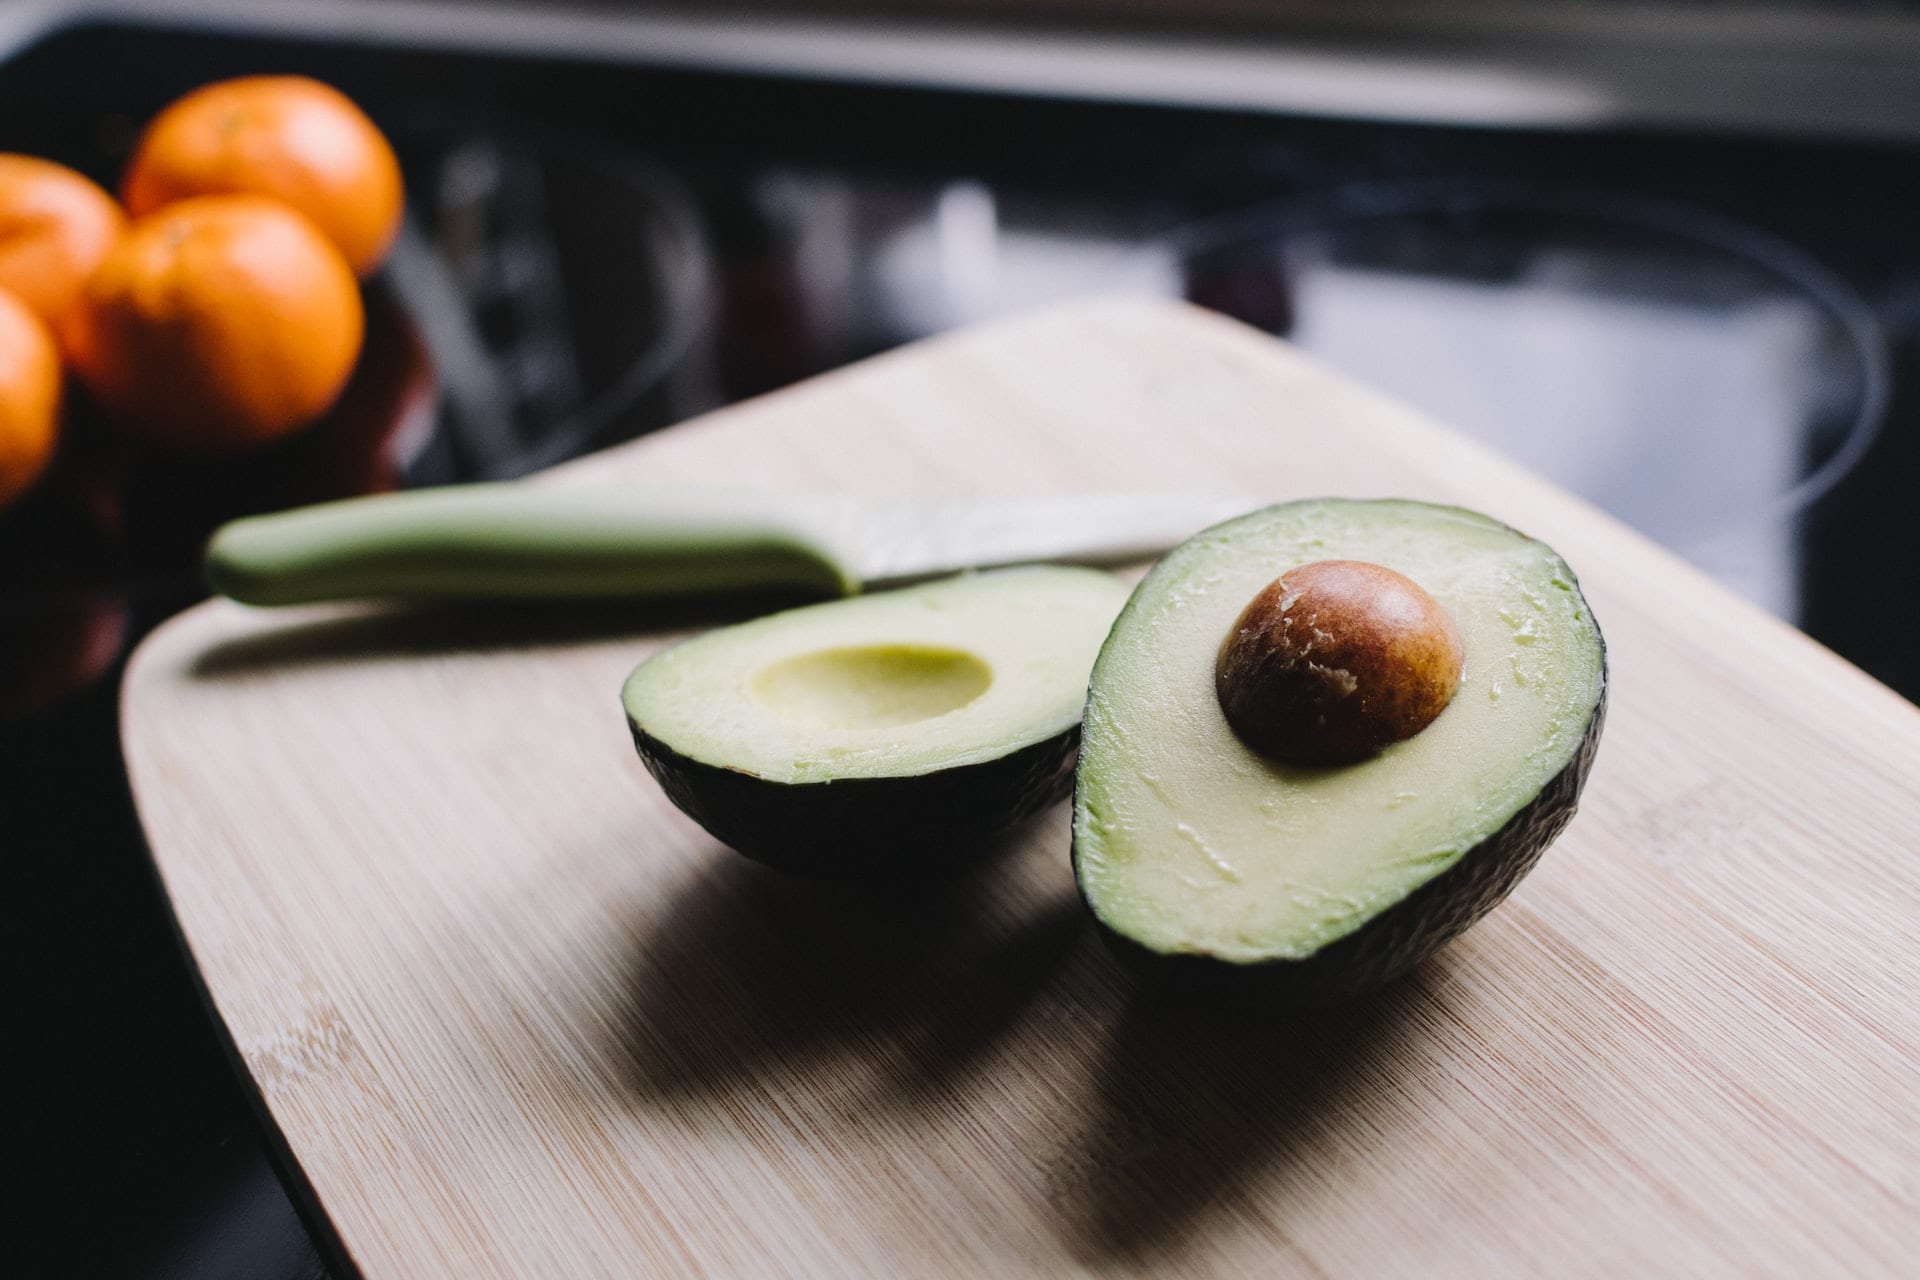 Avocado cut in half on a chopping board beside a knife, with oranges in the background